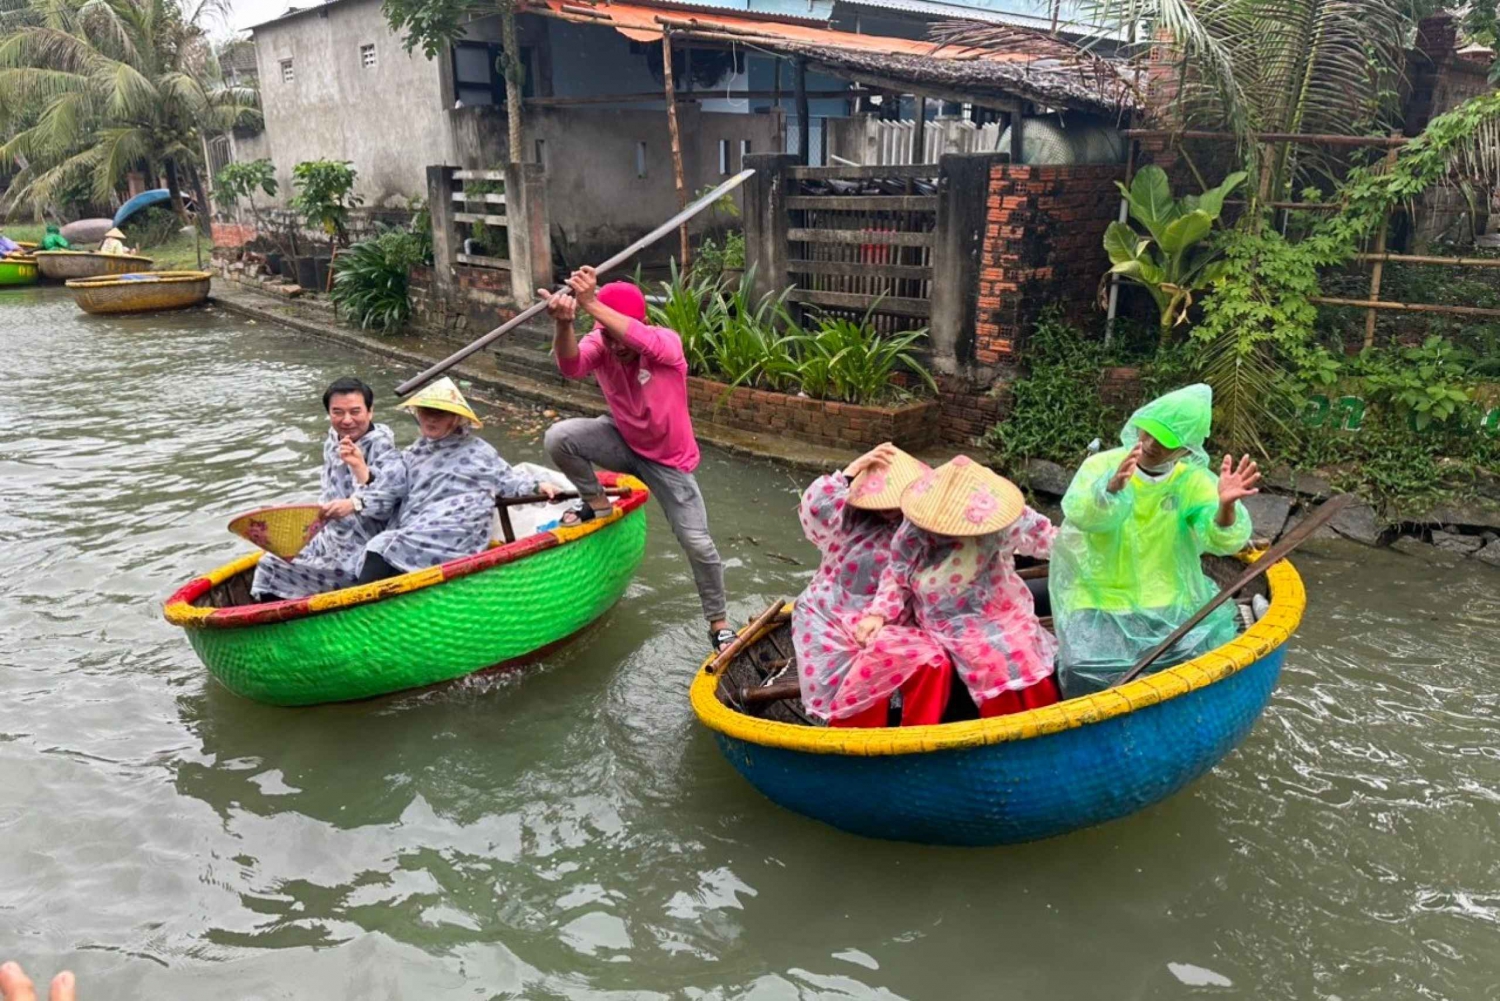 Hoi An: Bamboo Basket Boat Experience on Thu Bon River